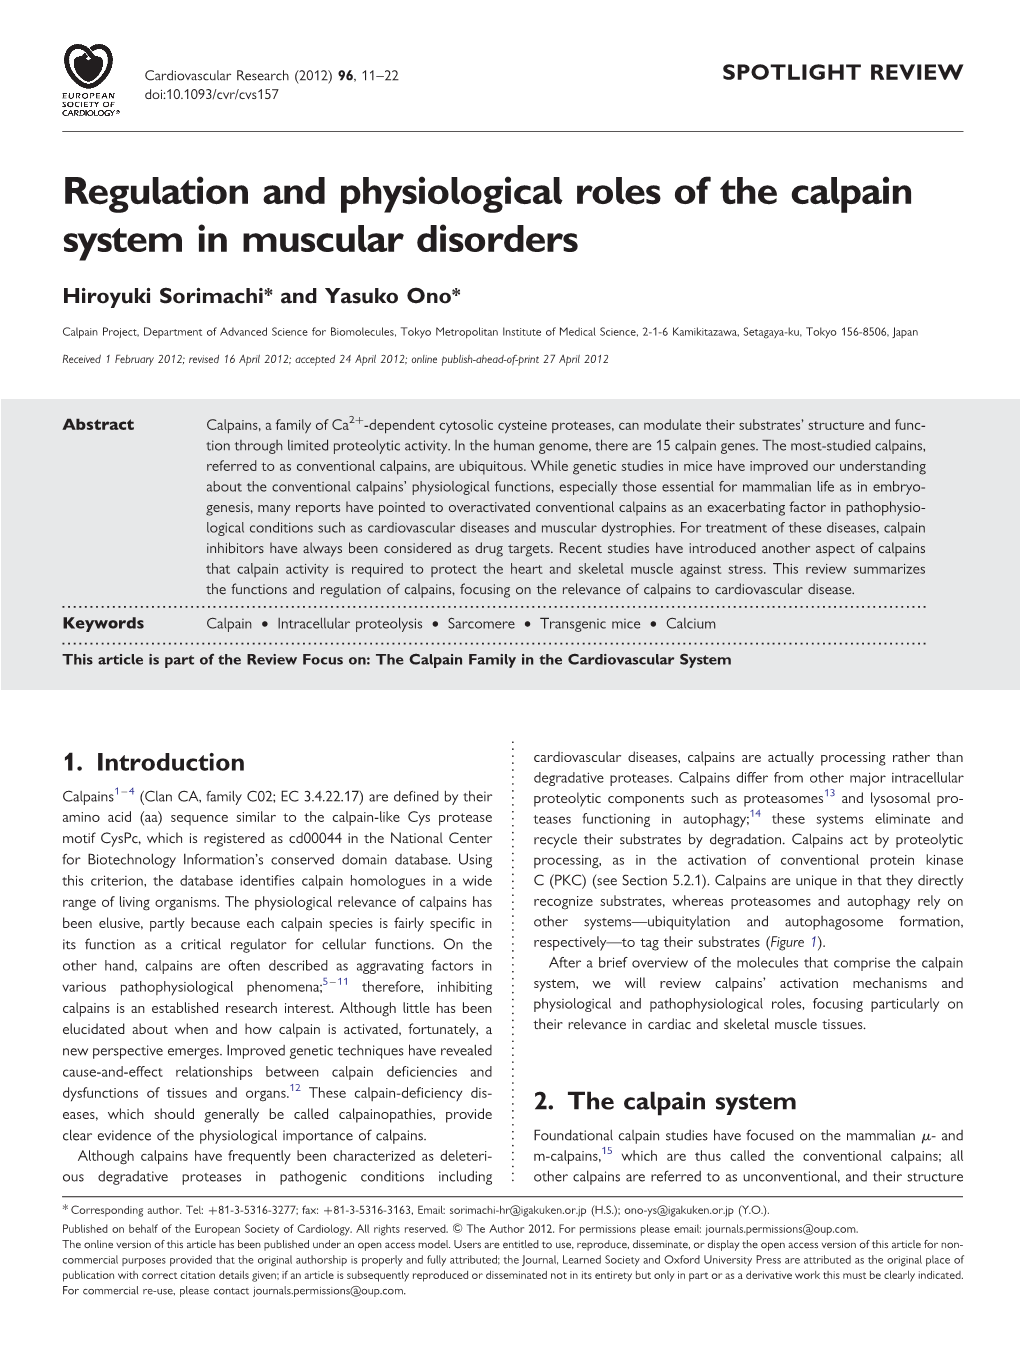 Regulation and Physiological Roles of the Calpain System in Muscular Disorders